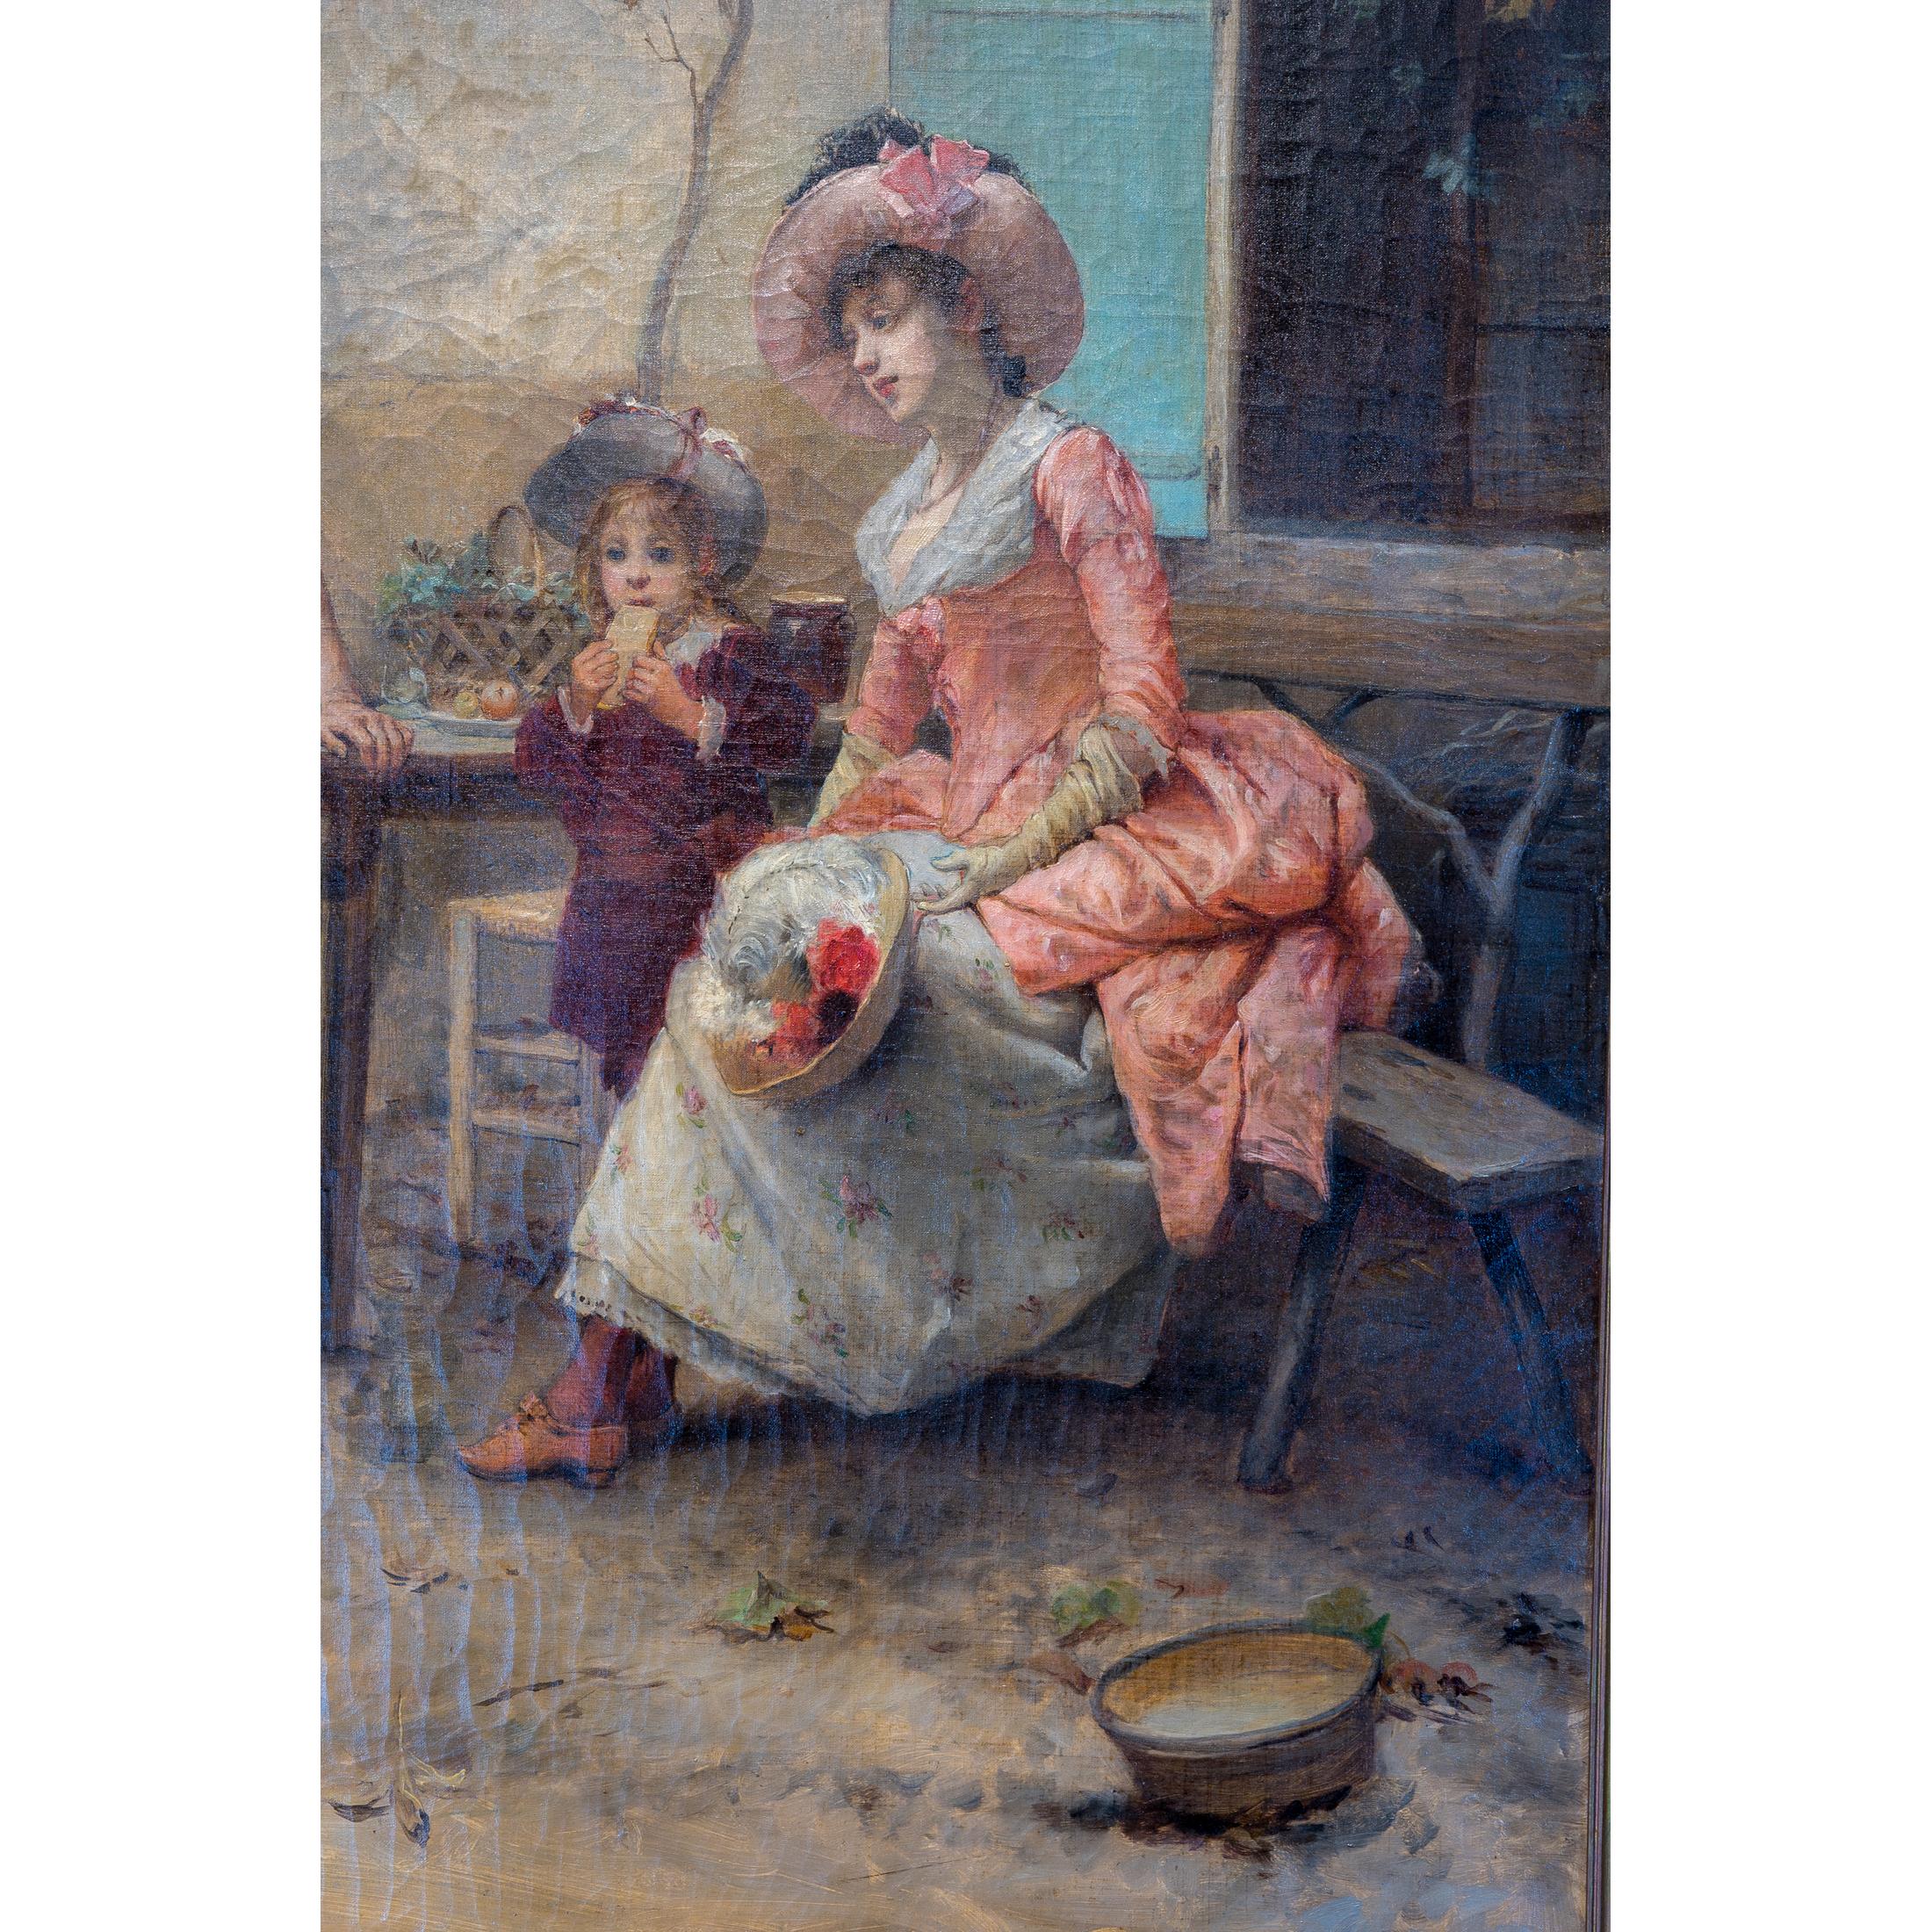 A Fine Painting of Women and Children by Émile Auguste Pinchart - Gray Figurative Painting by Emile Auguste Pinchart